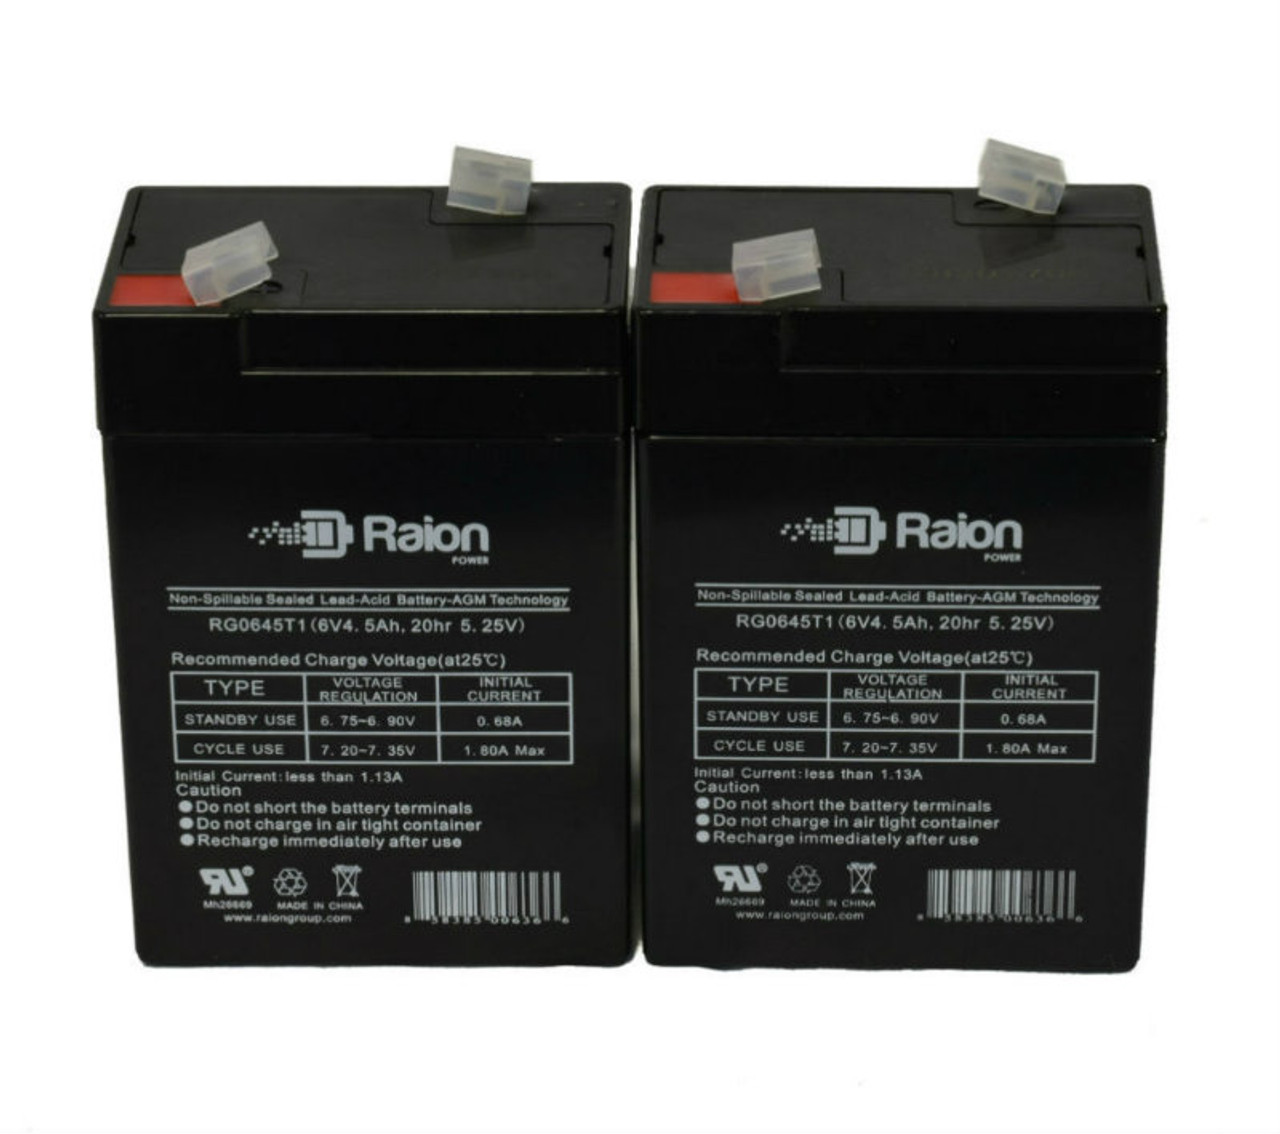 Raion Power 6 Volt 4.5Ah RG0645T1 Replacement Battery for Consent GS64 - 2 Pack